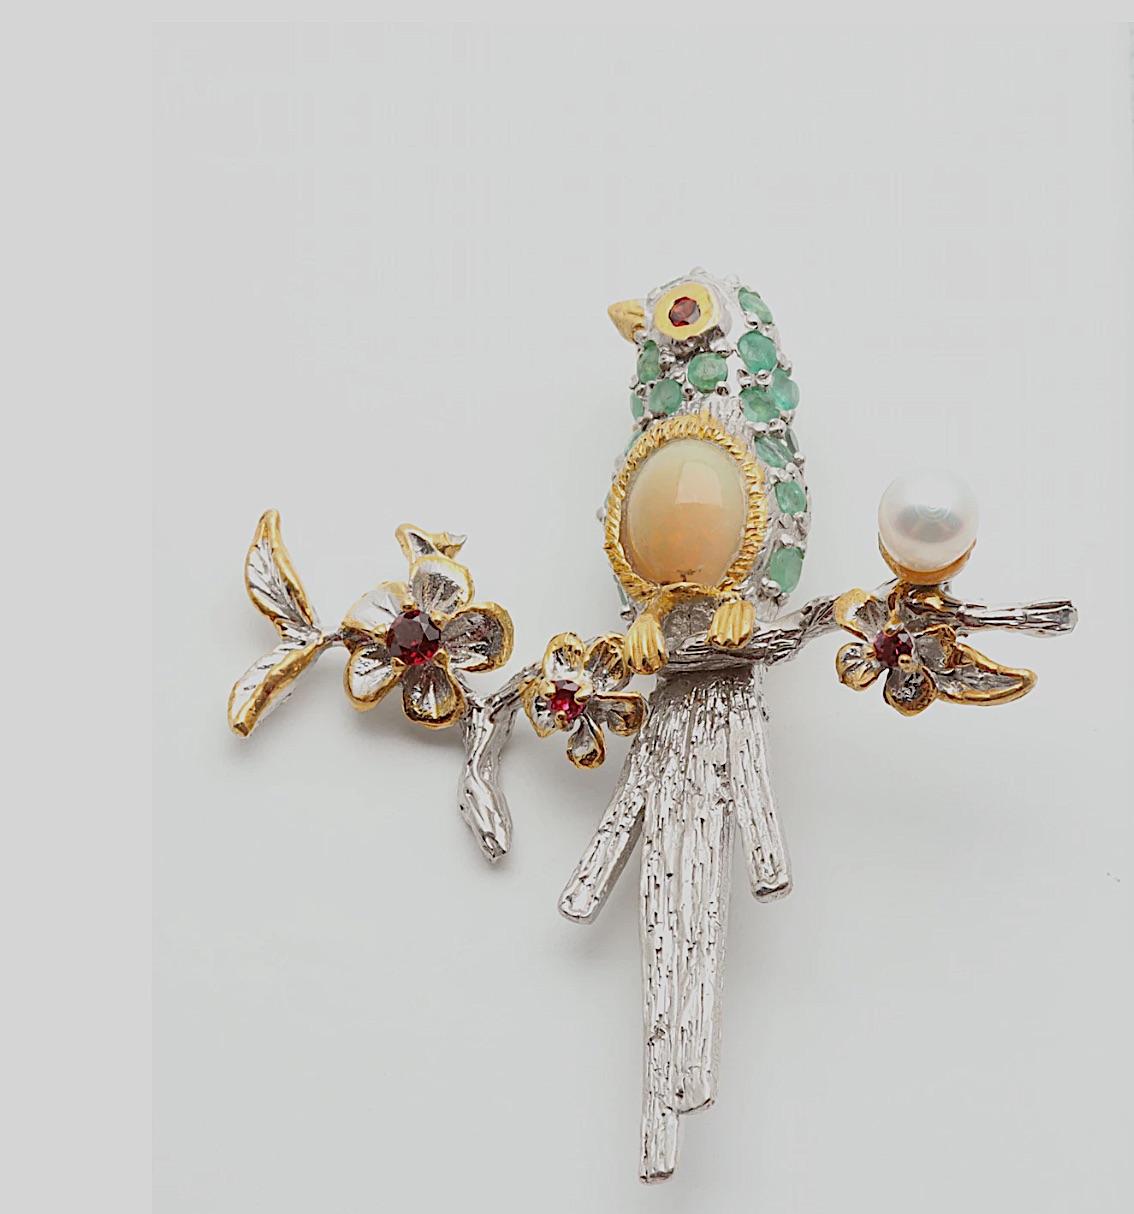 This is a most charming and inspired design and a lovely accent to any outfit.

a Beautiful Vintage Colorful Gemstone Sterling Silver and Vermeil Bird Brooch! 
the embellished Sterling and Vermeil Accent Bird Sitting on a Tree Branch with Bird's